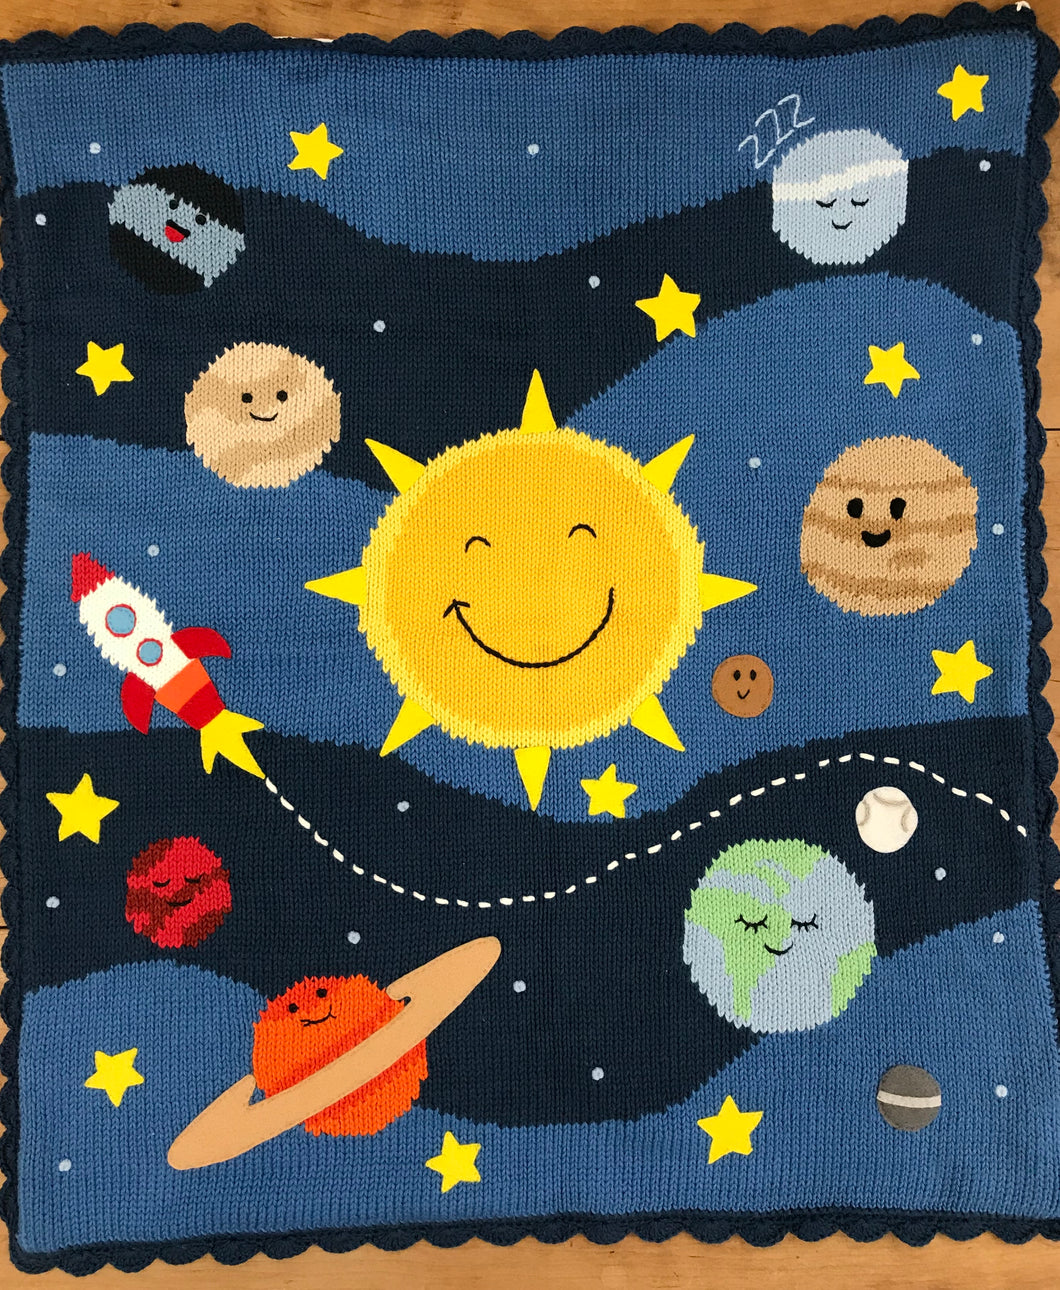 Space Carriage Blanket